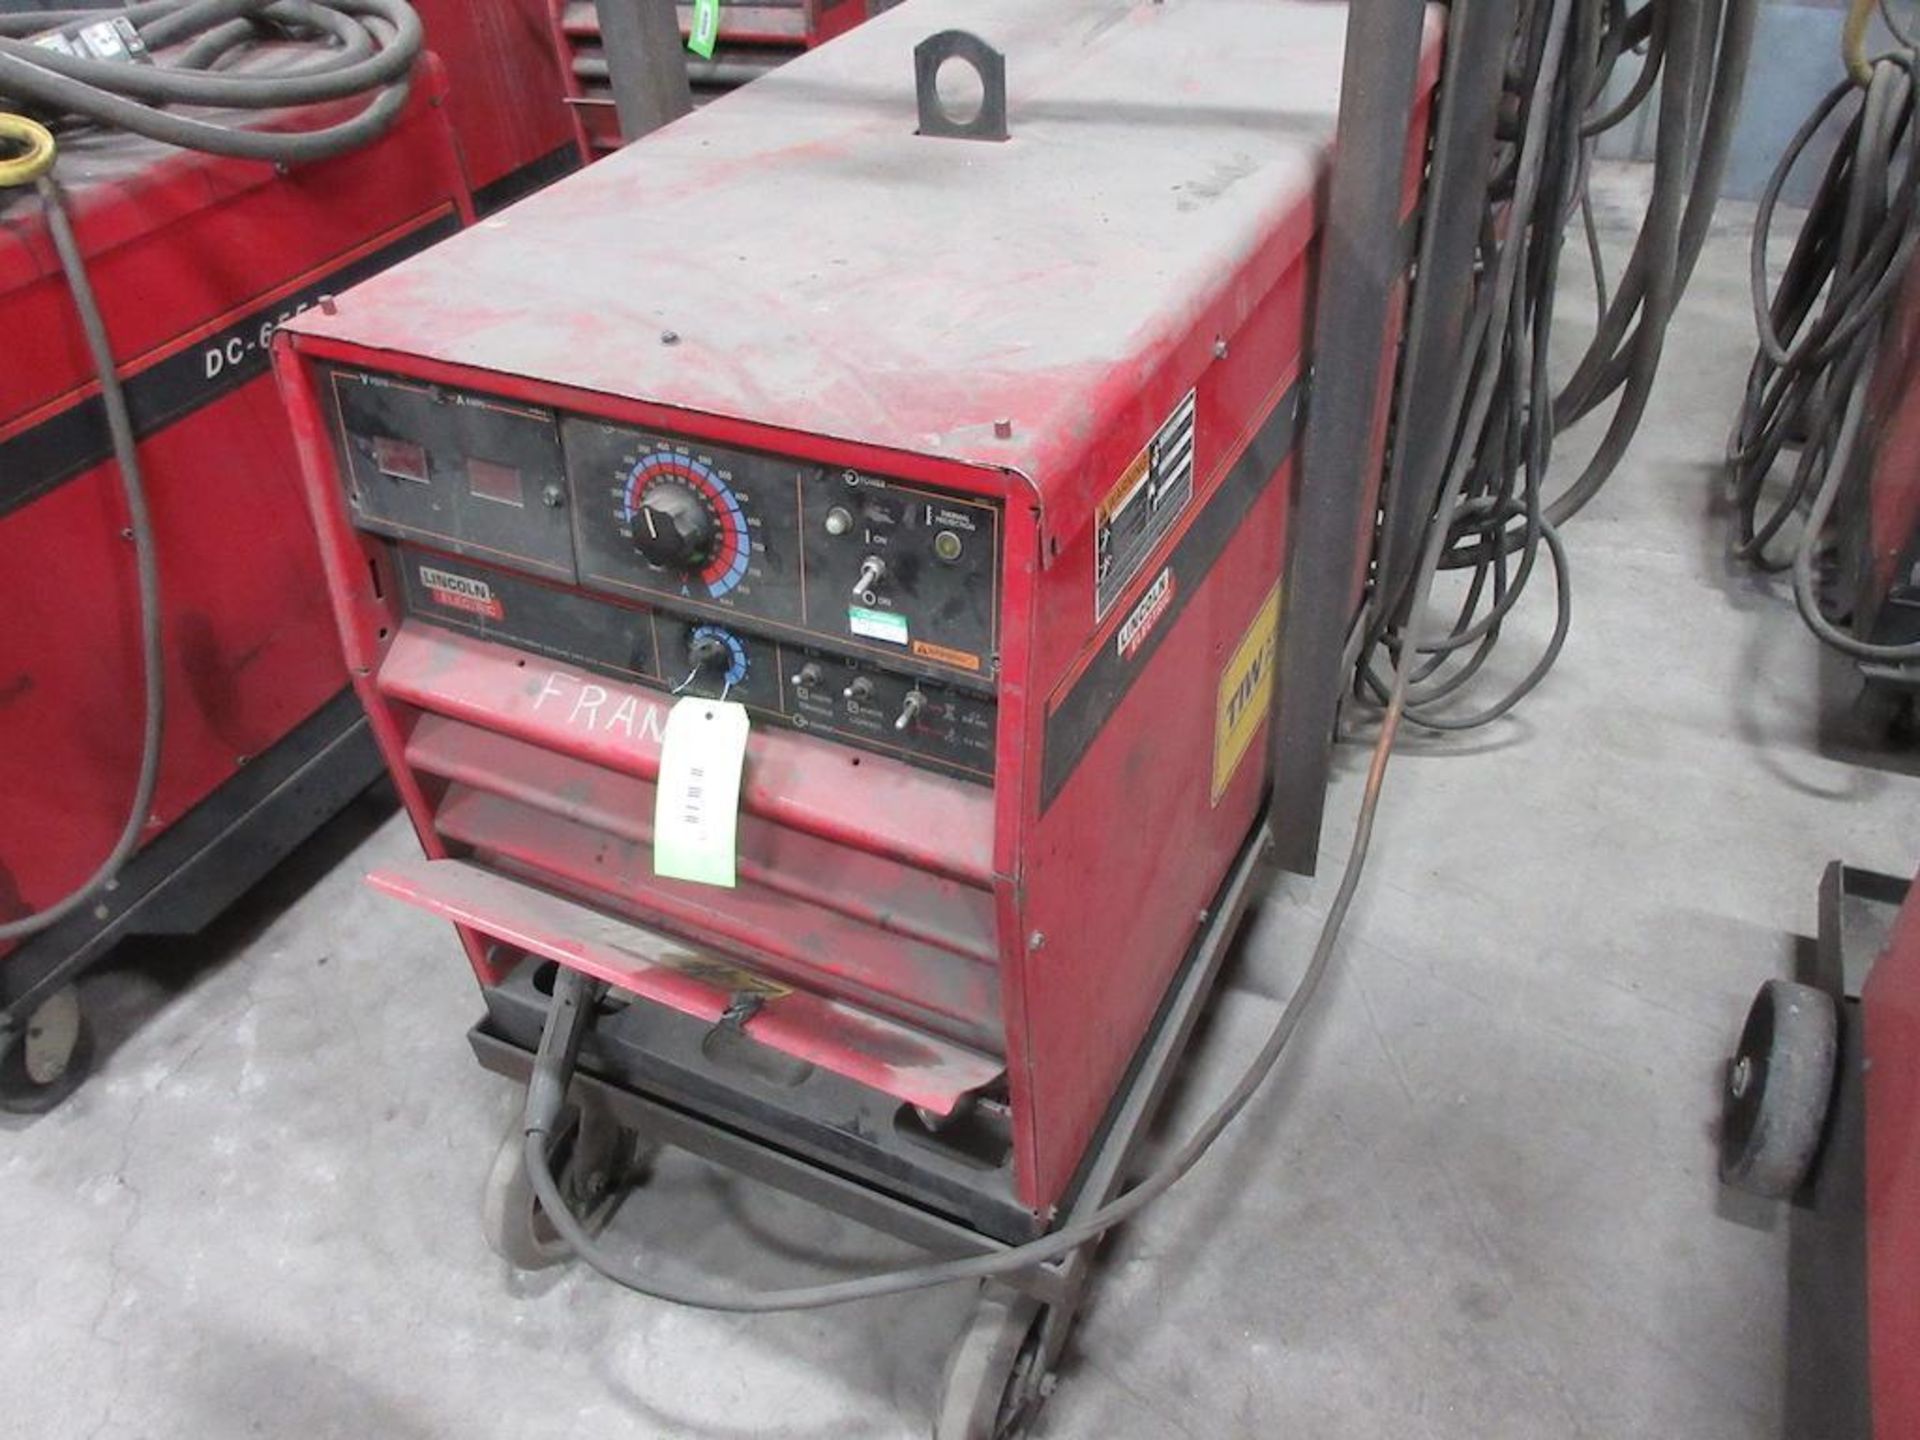 LINCOLN ELECTRIC DC 655 WELDING MACHINE W PORTABLE CART